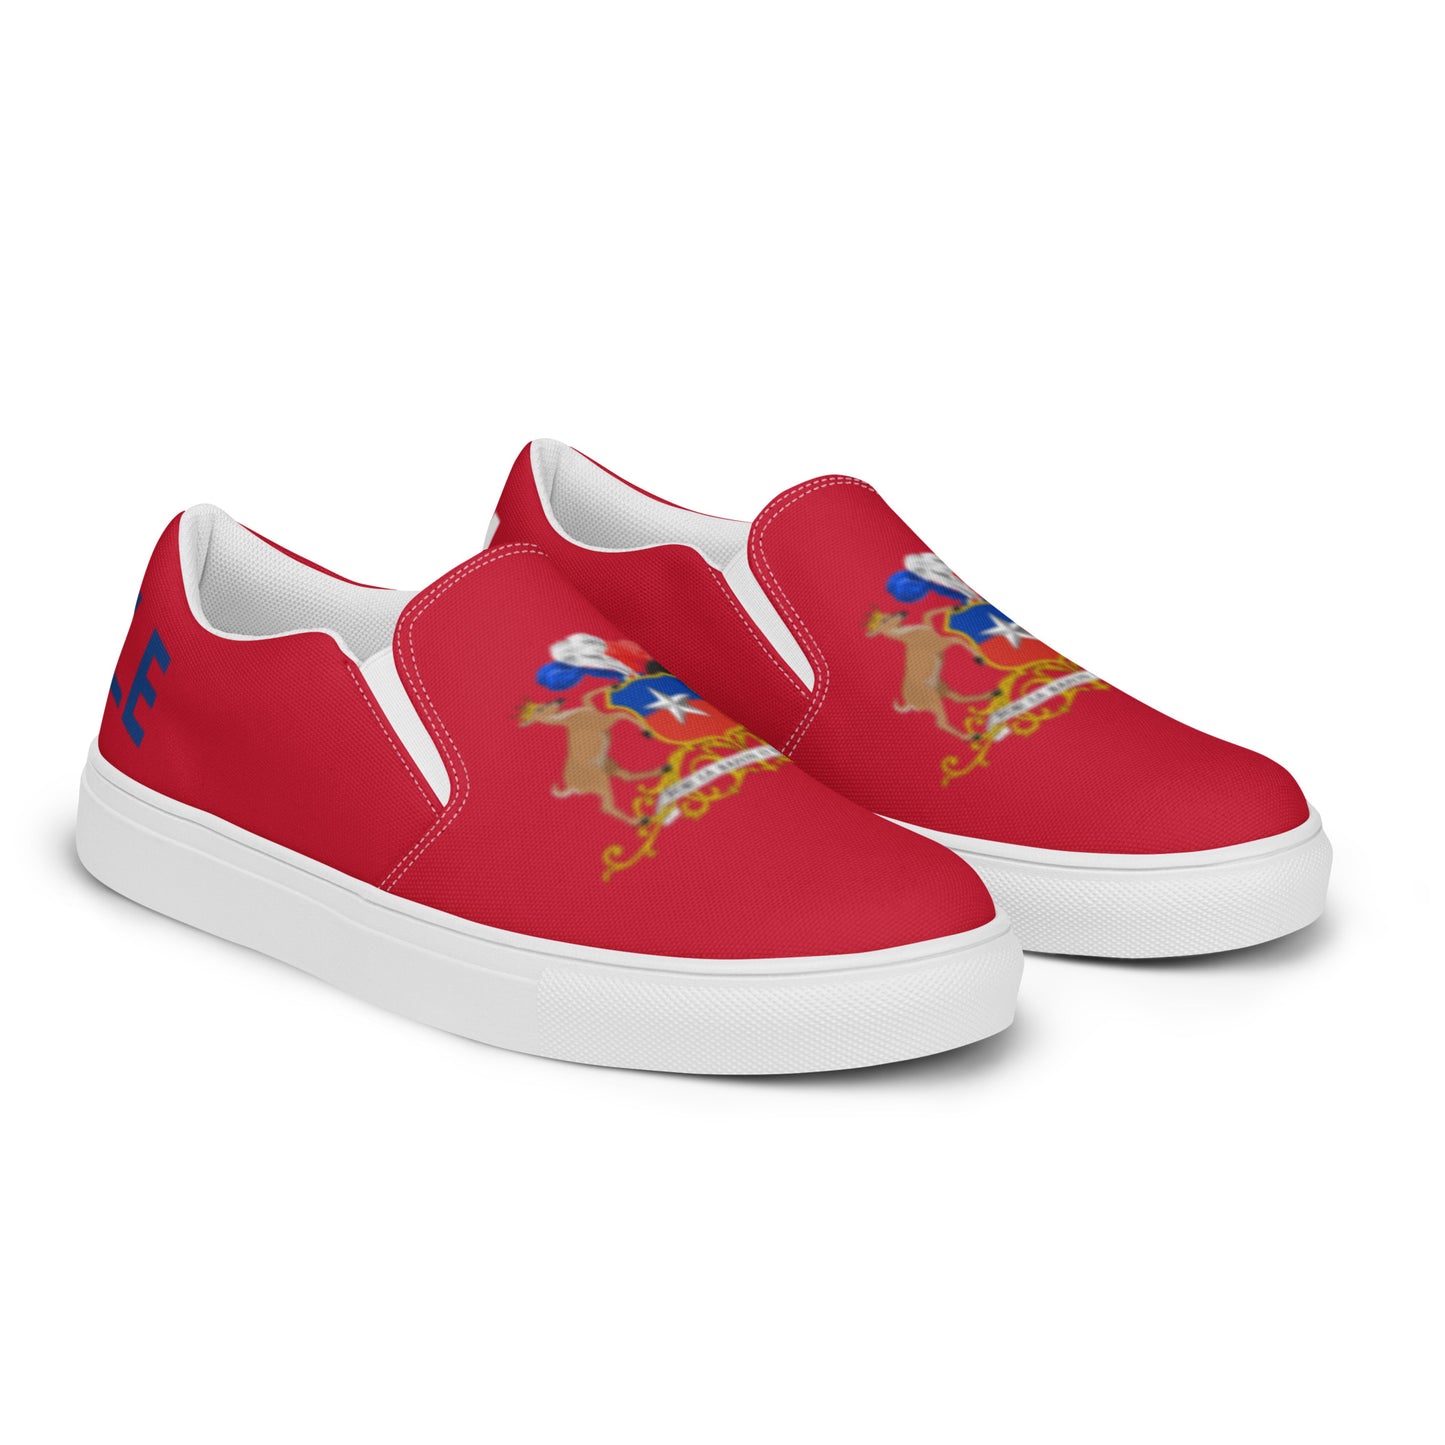 Chile - Men - Red - Slip-on shoes